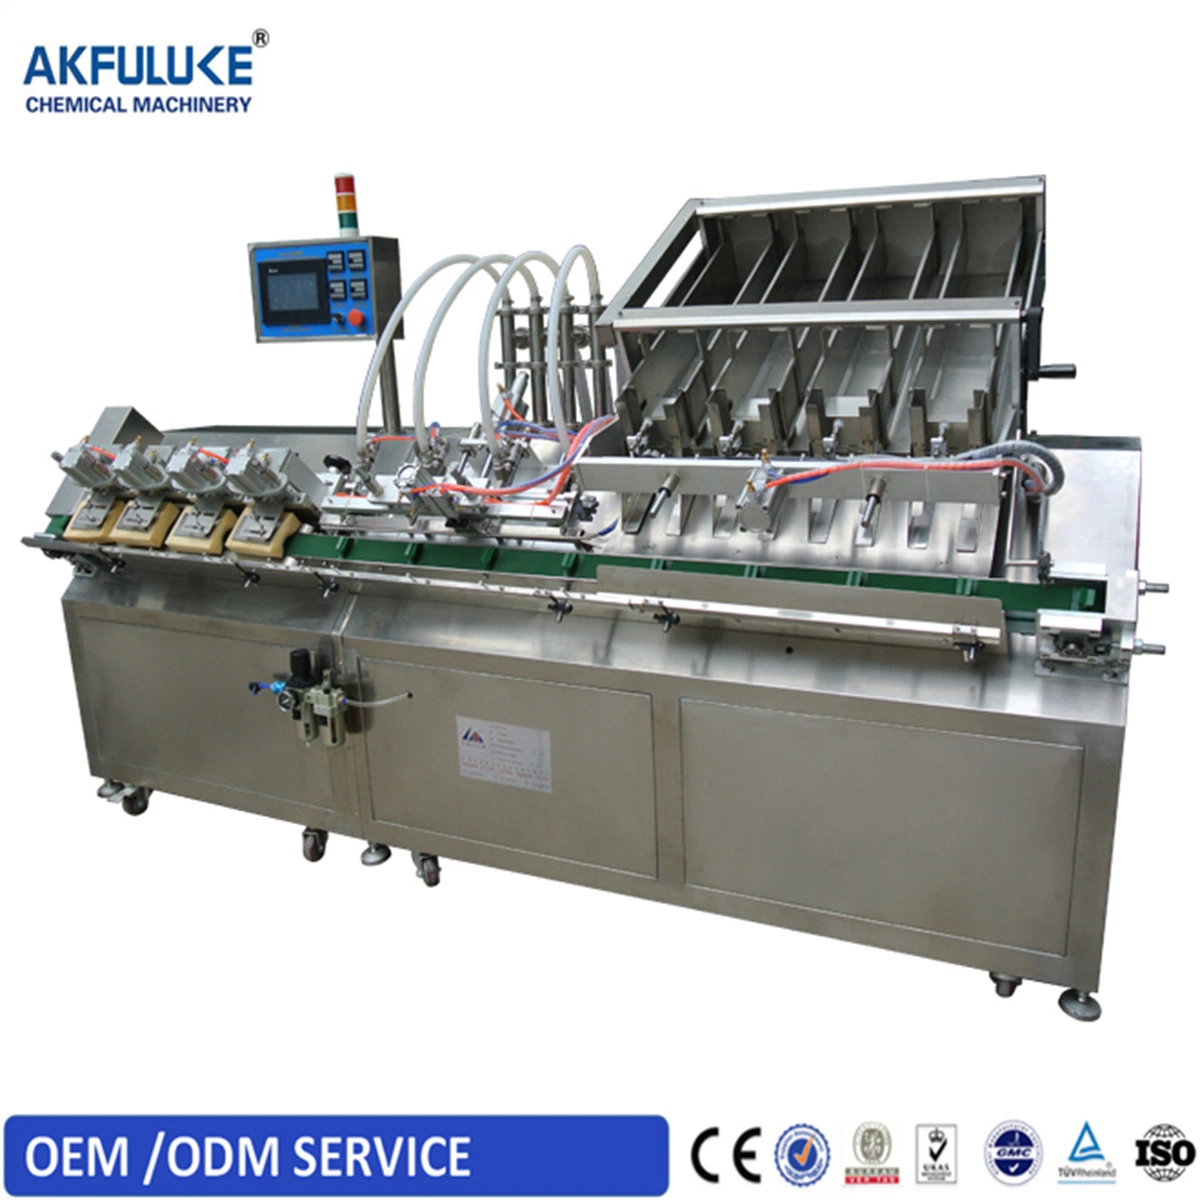 Full Automatic Vertical Powder Milk / Flour / Spice / Protein/Washing Powder/ Pillow Bag Food Packing Packaging Filling Sealing Machine Automatic